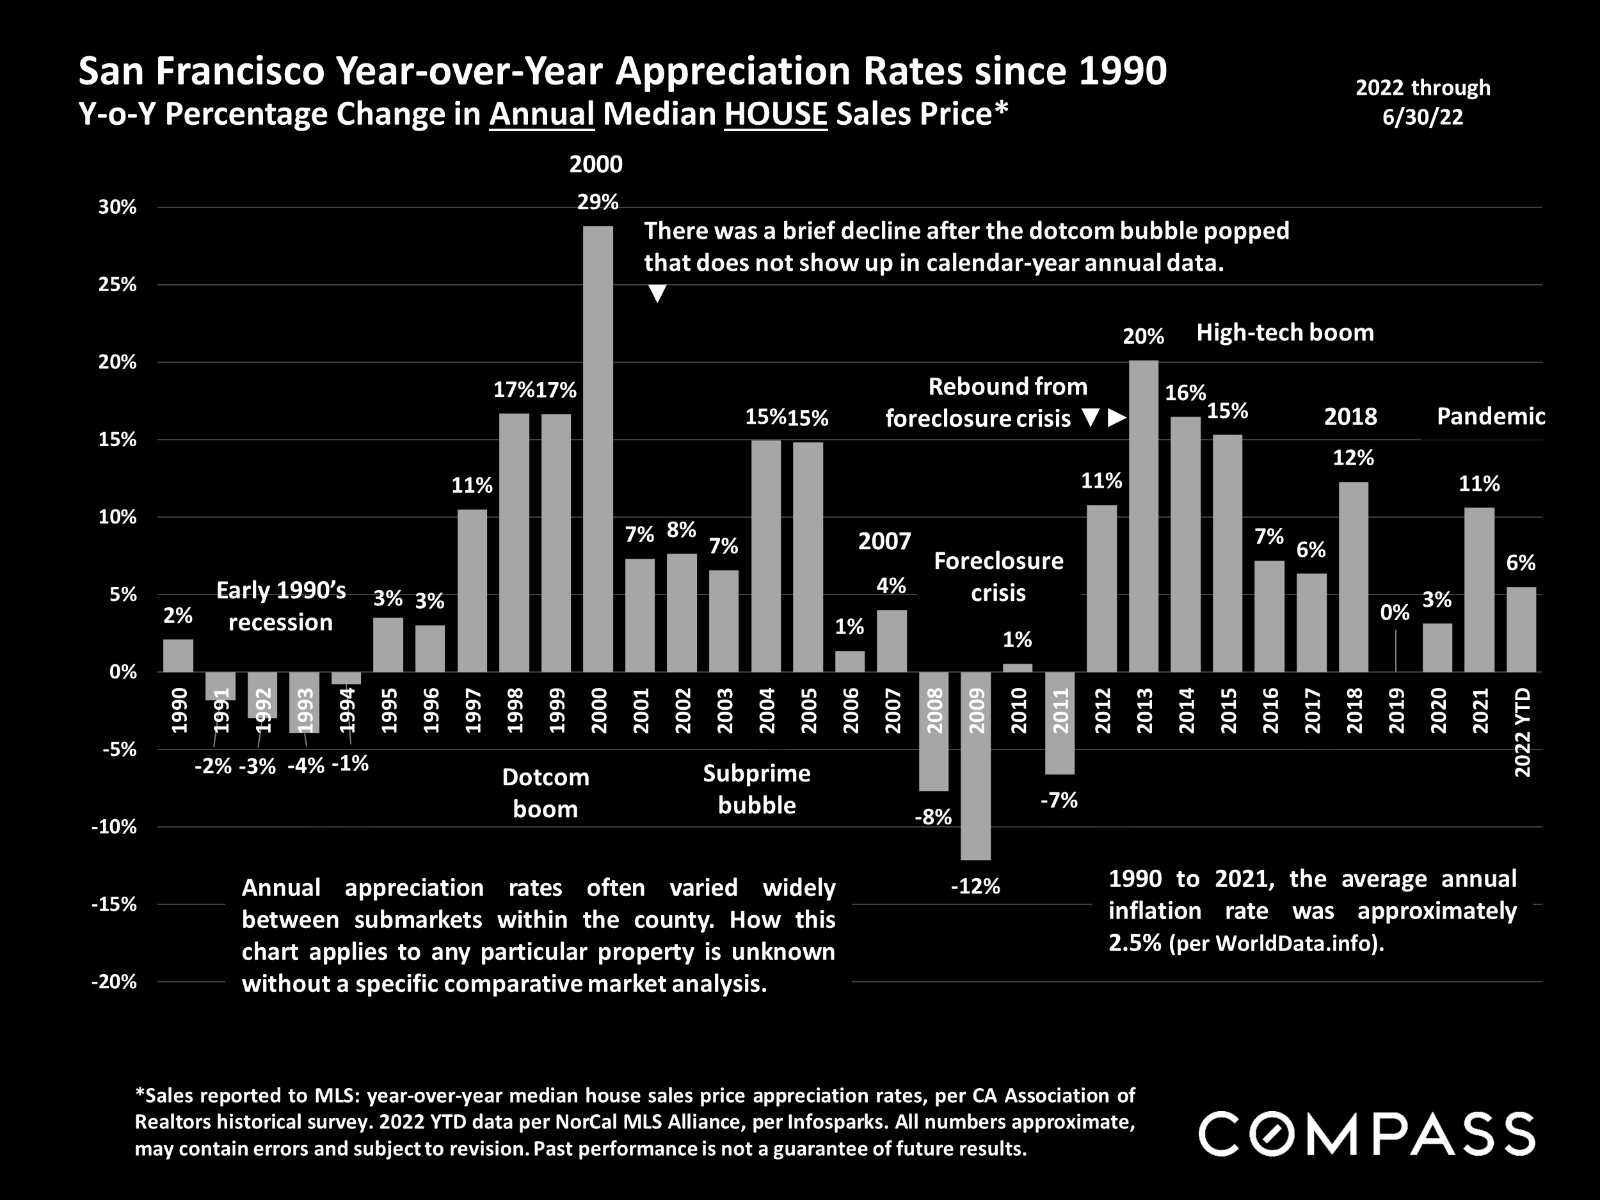 San Francisco Year Over since 1990